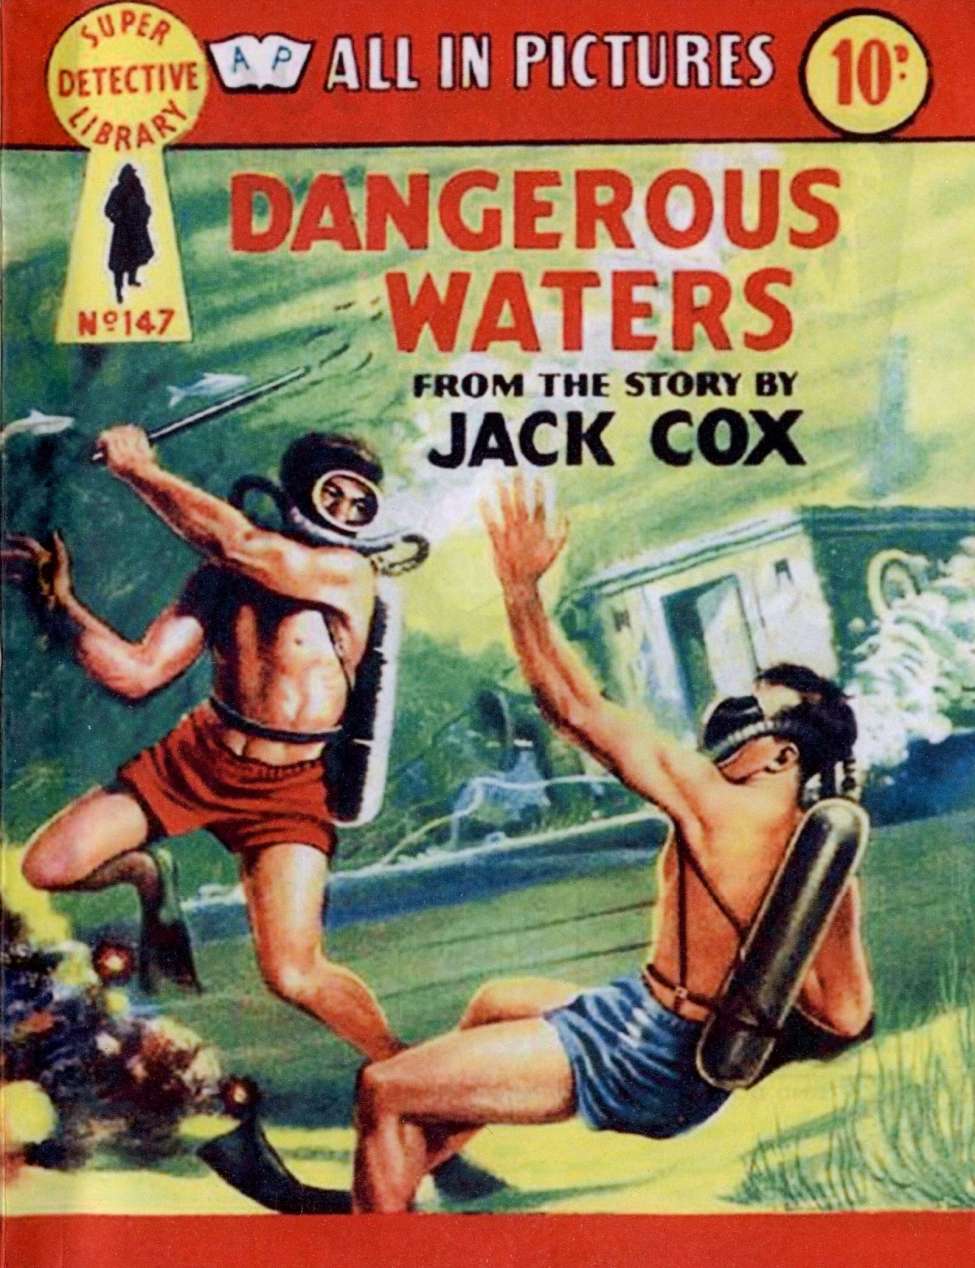 Book Cover For Super Detective Library 147 - Dangerous Waters